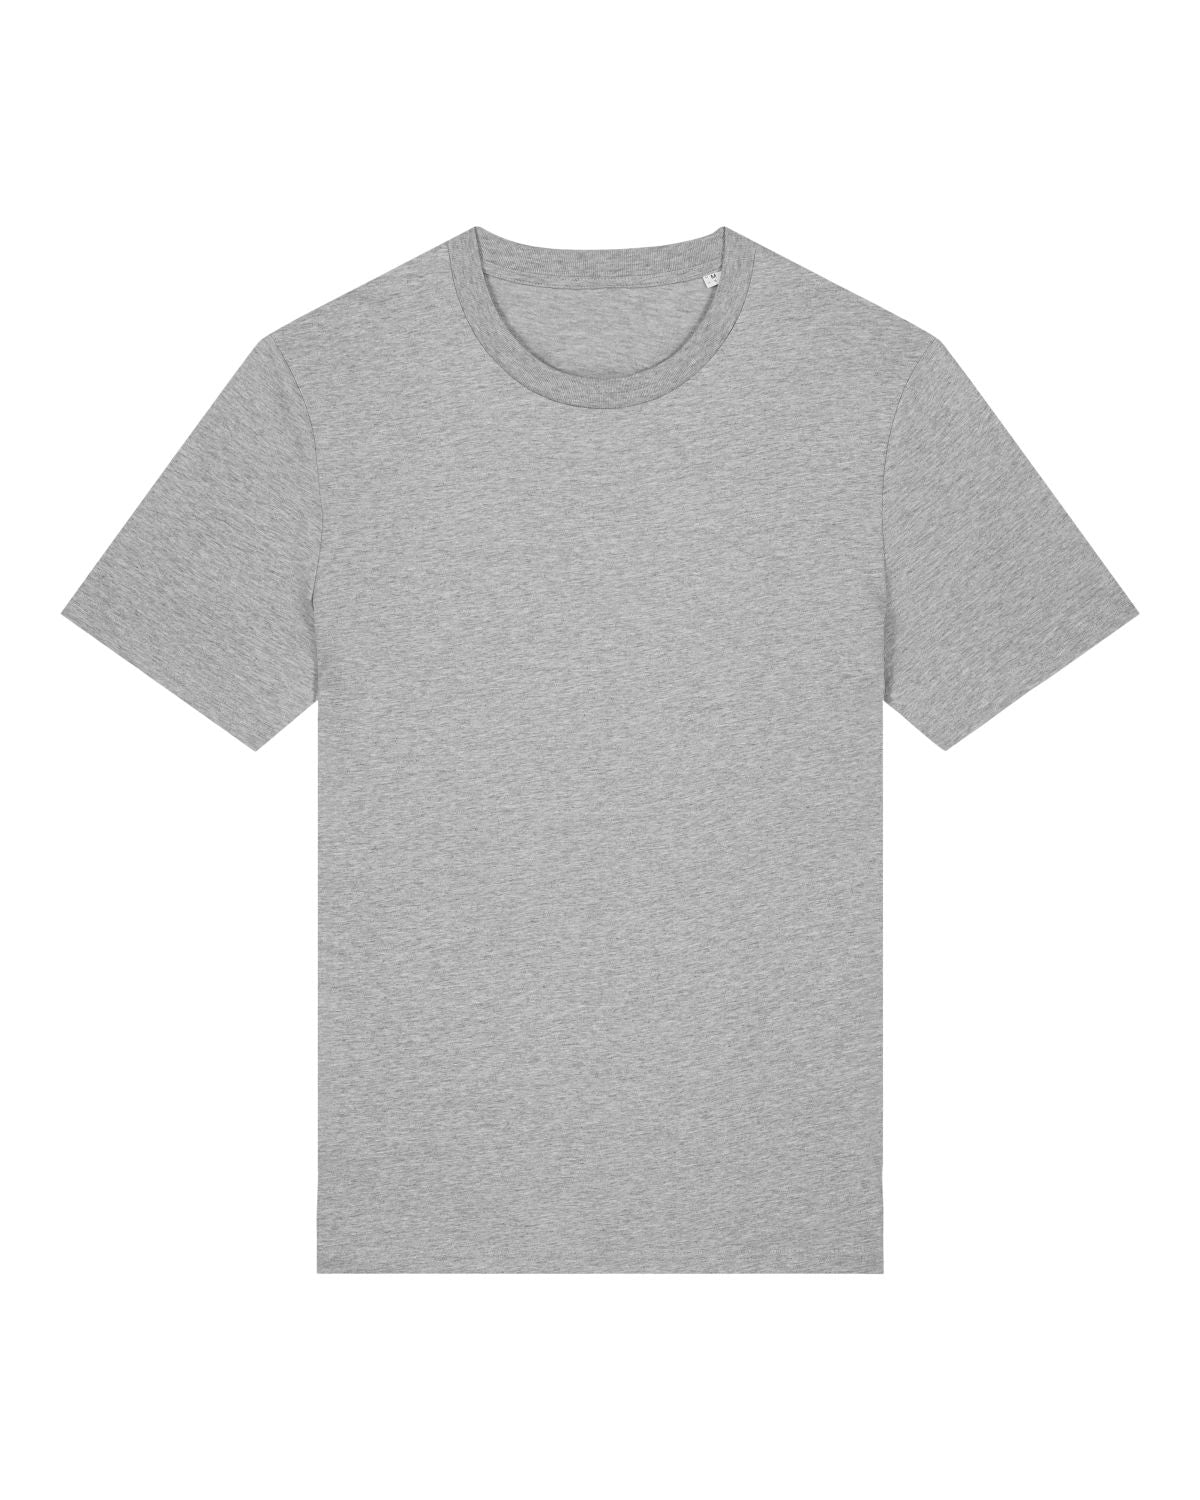 Customize your own sustainable t-shirt made of 100% GOTS-certified organic cotton